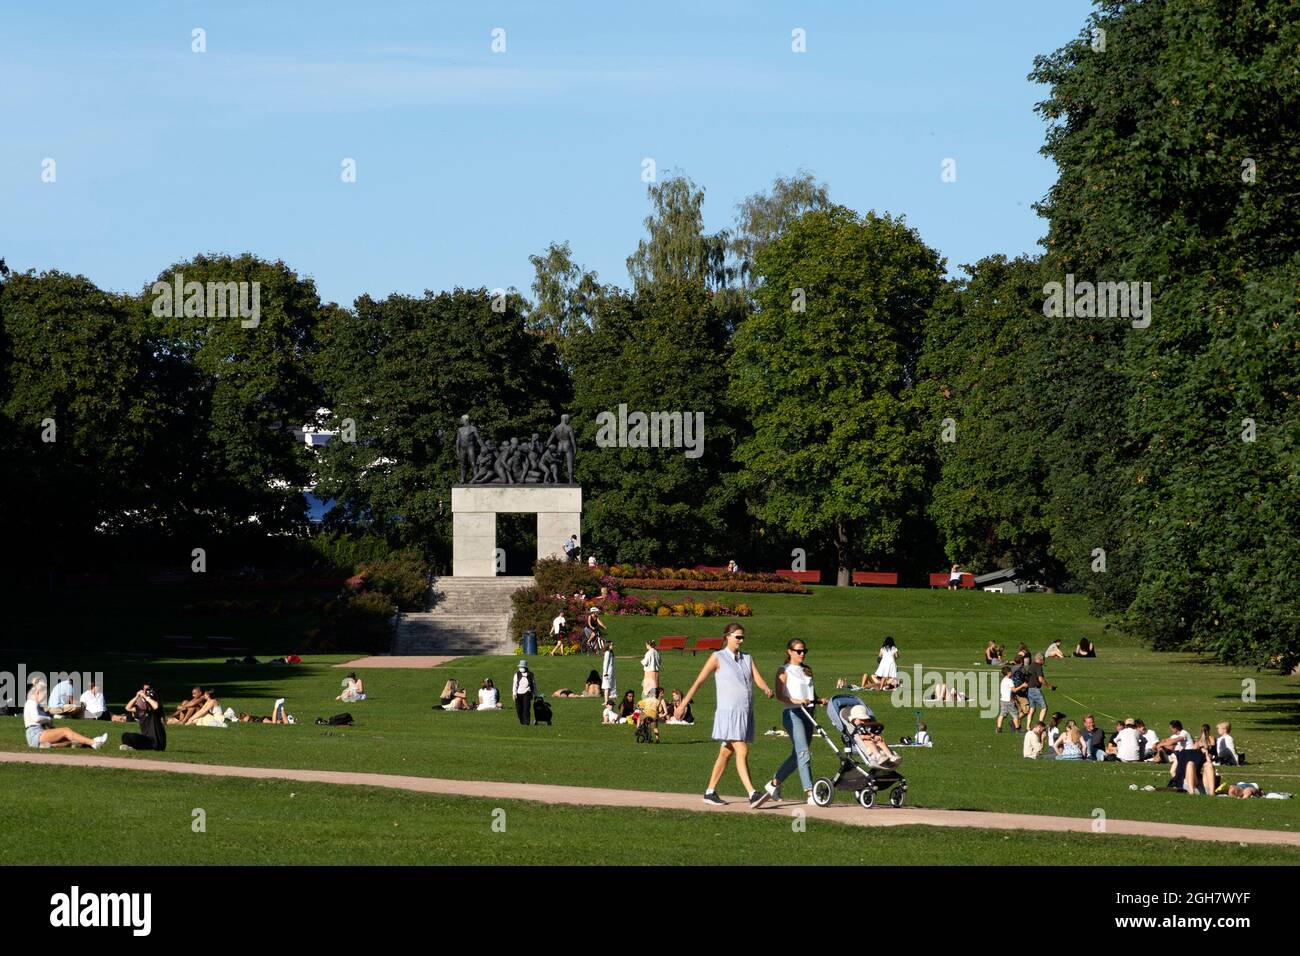 People enjoying the sun on an unusually hot day at the Frogner Park in Oslo, Norway Stock Photo